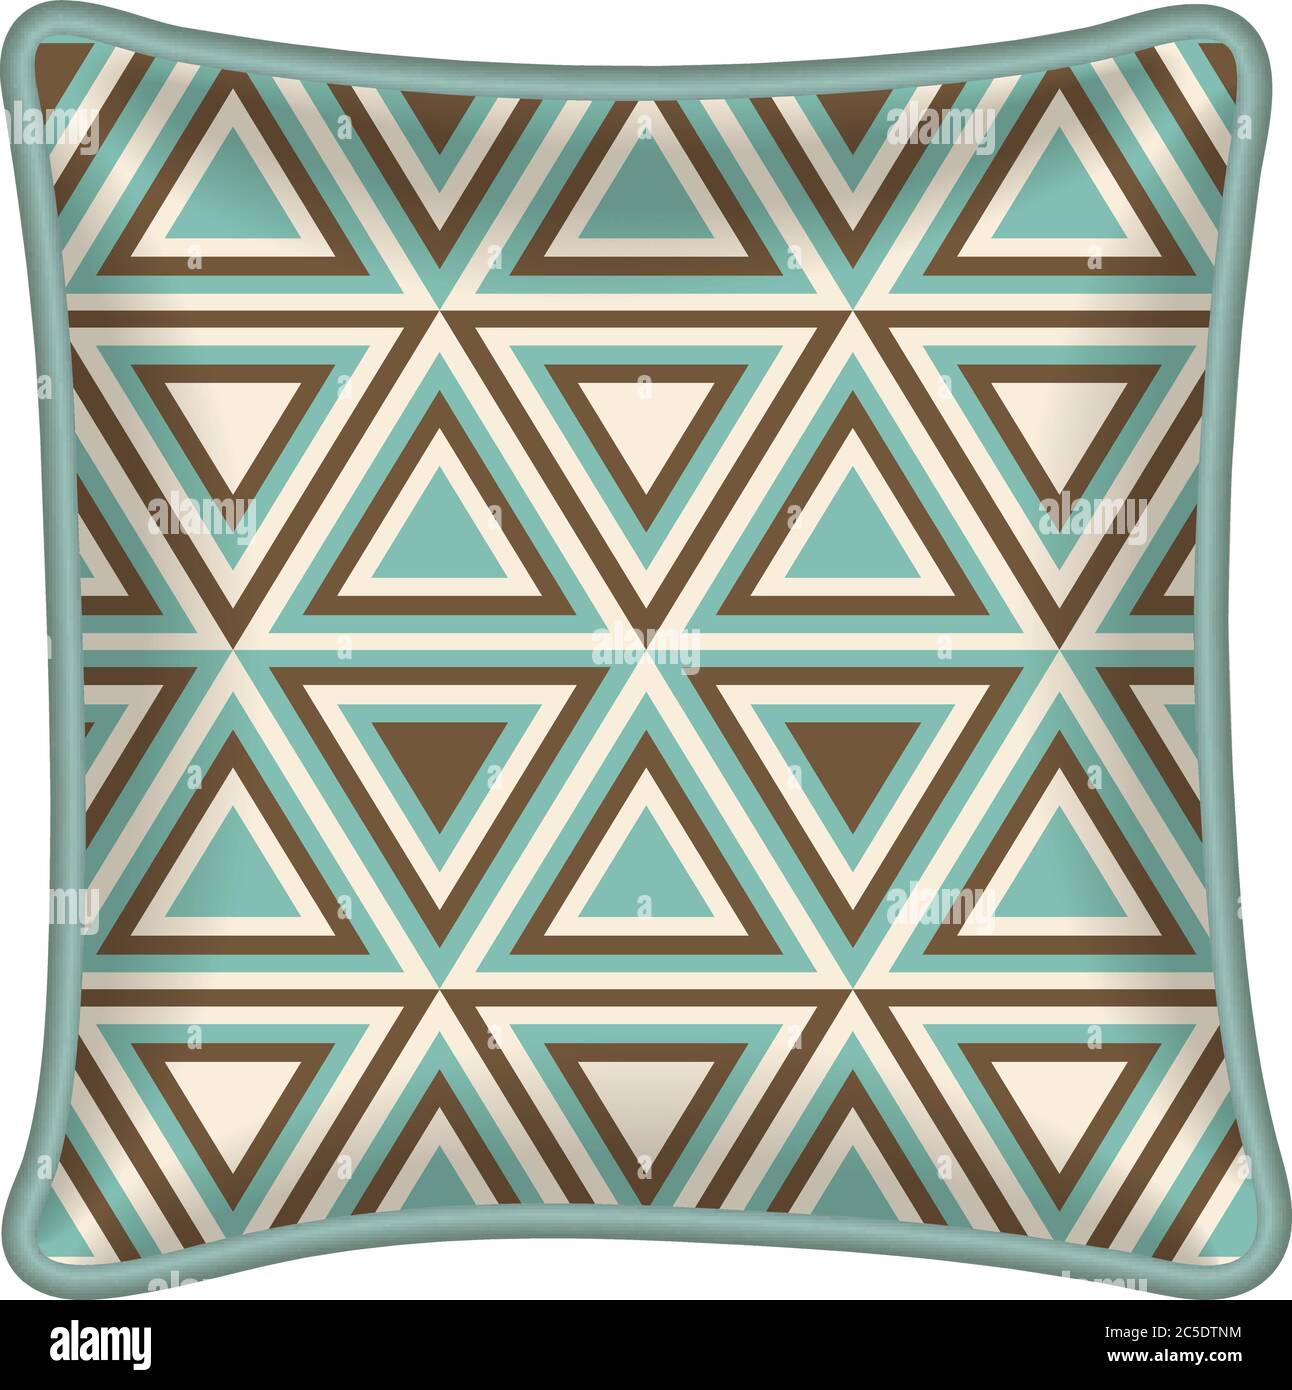 Interior design element: Decorative pillow with patterned pillowcase (abstract geometric pattern in mint and brown colors). Isolated on white. Vector Stock Vector